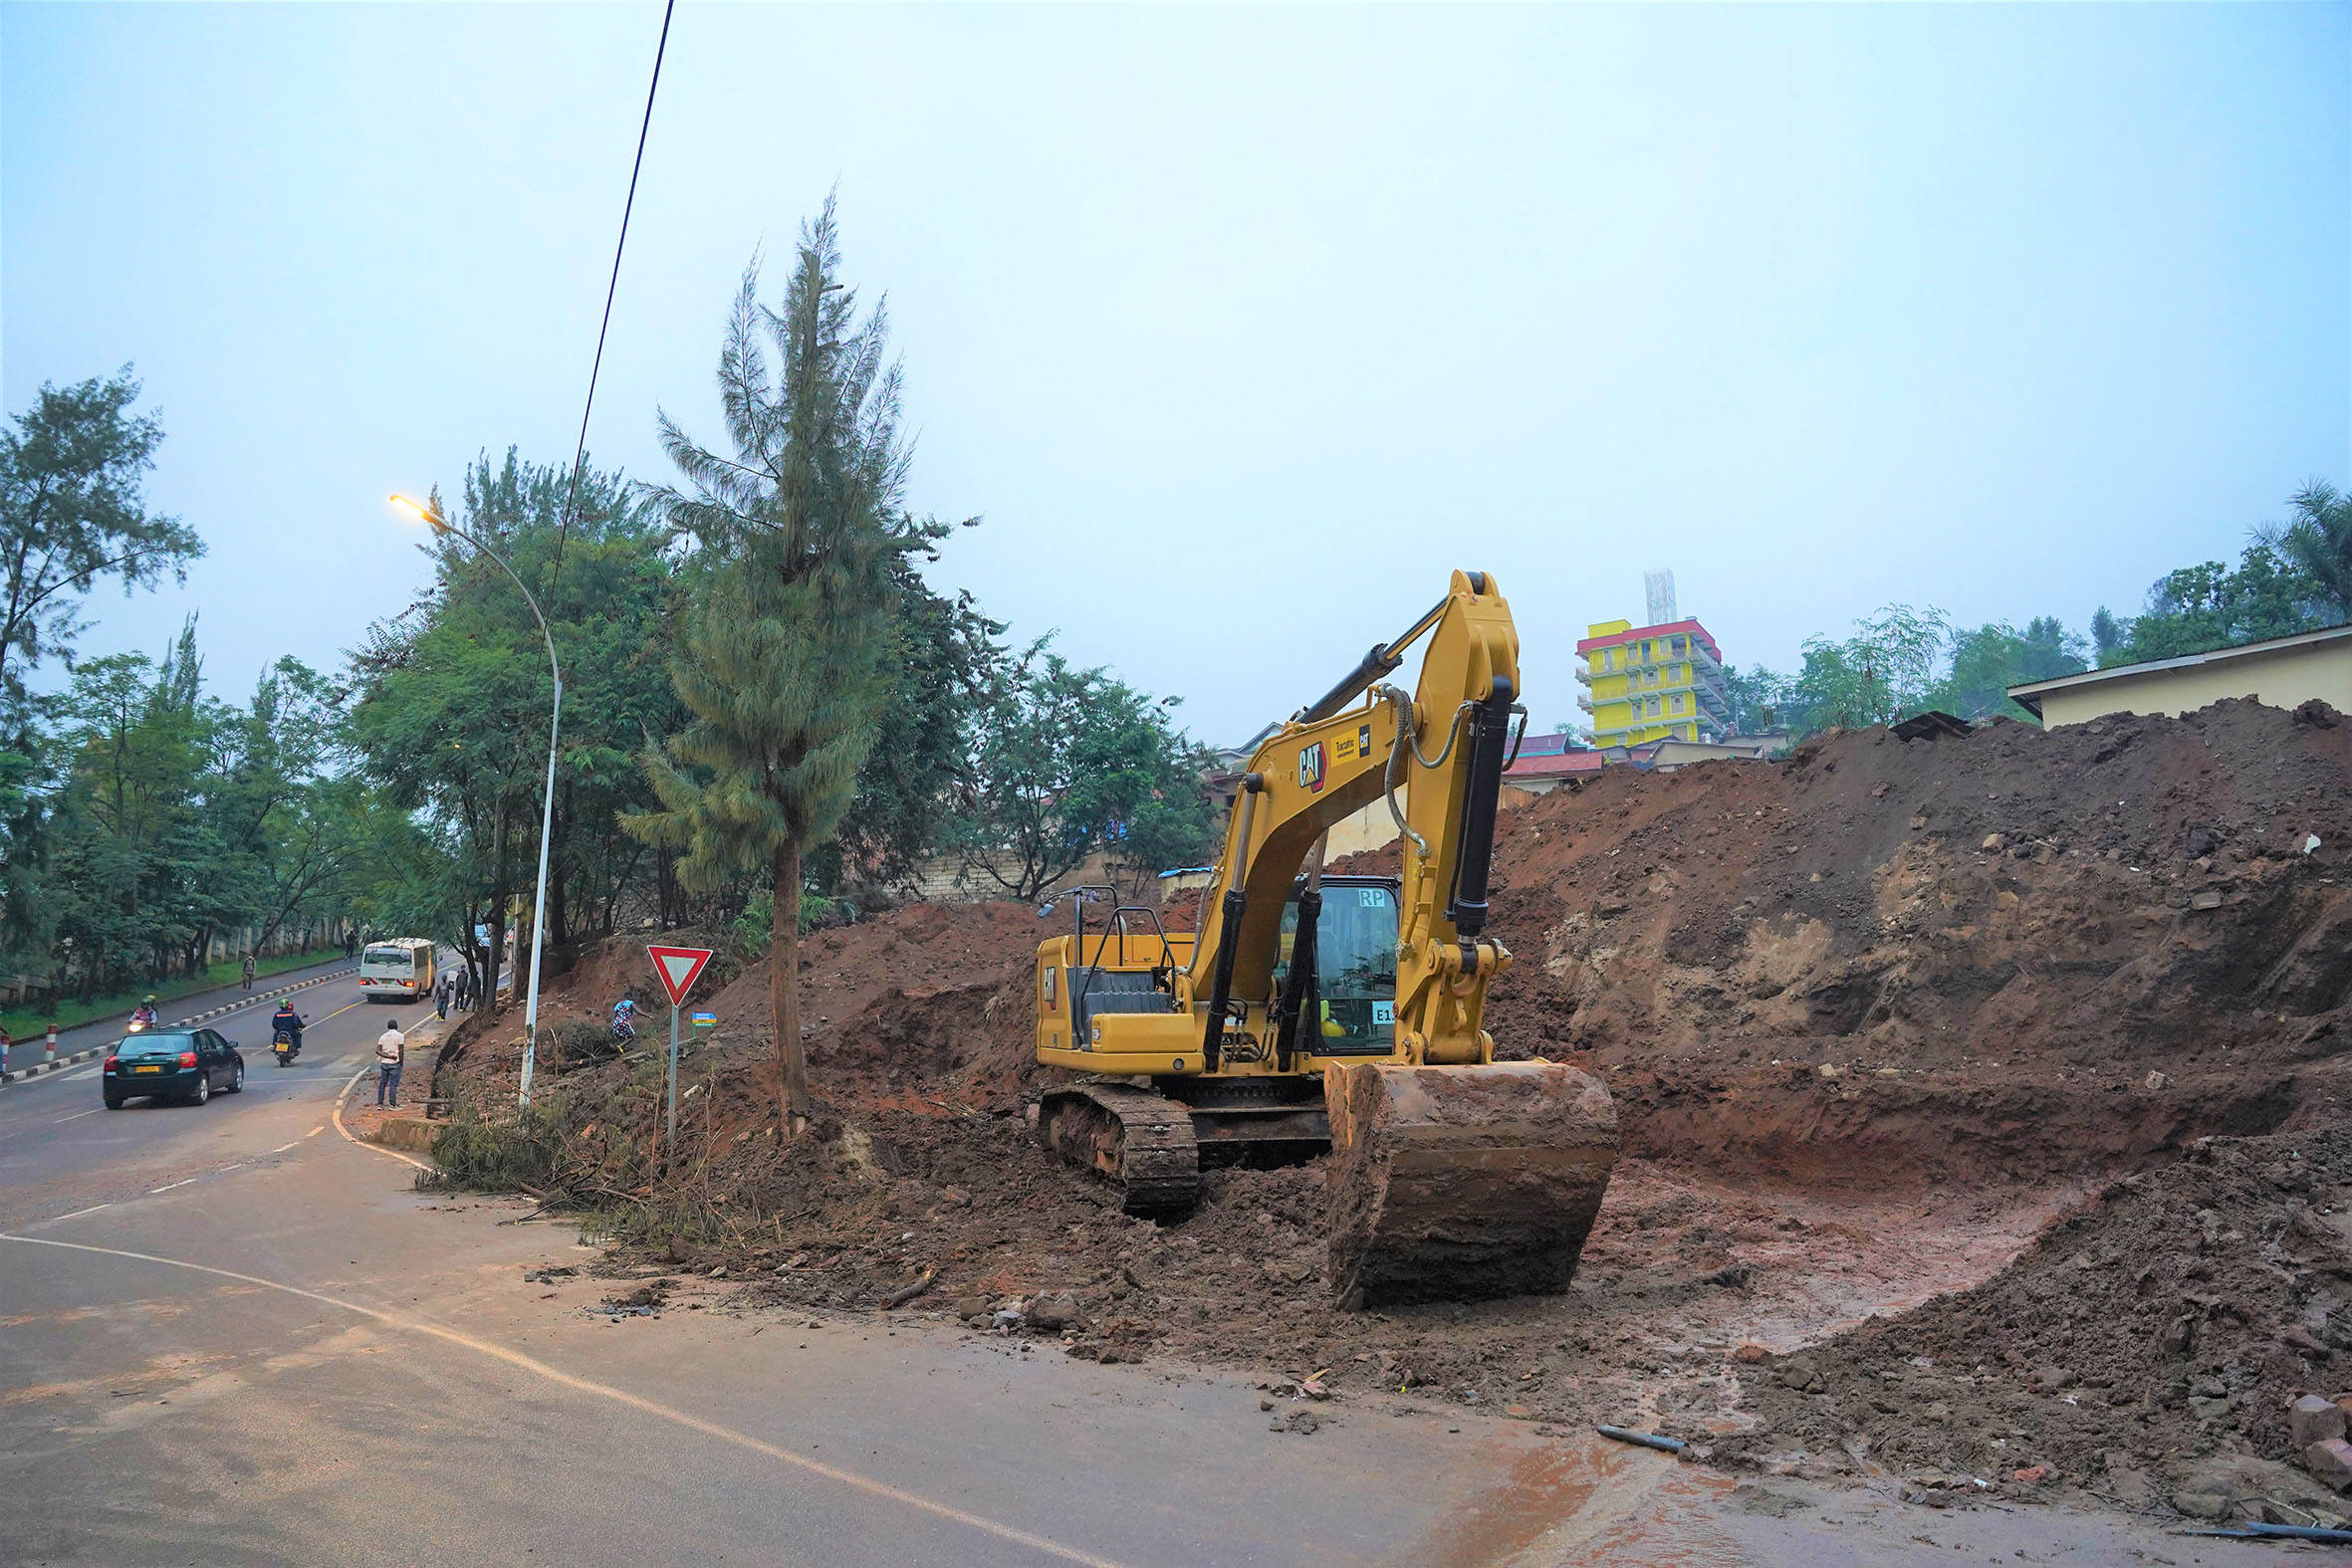 An excavator during works on Kacyiru-Kimicanga road, one of the side roads being upgraded as the capital Kigali gears up for the 26th edition of the Commonwealth Heads of Government Meeting (CHOGM) due next month. Officials have urged motorists to familiarise themselves with new side roads around the city since some of the main roads will be blocked during the weeklong summit. / Photo: File. 